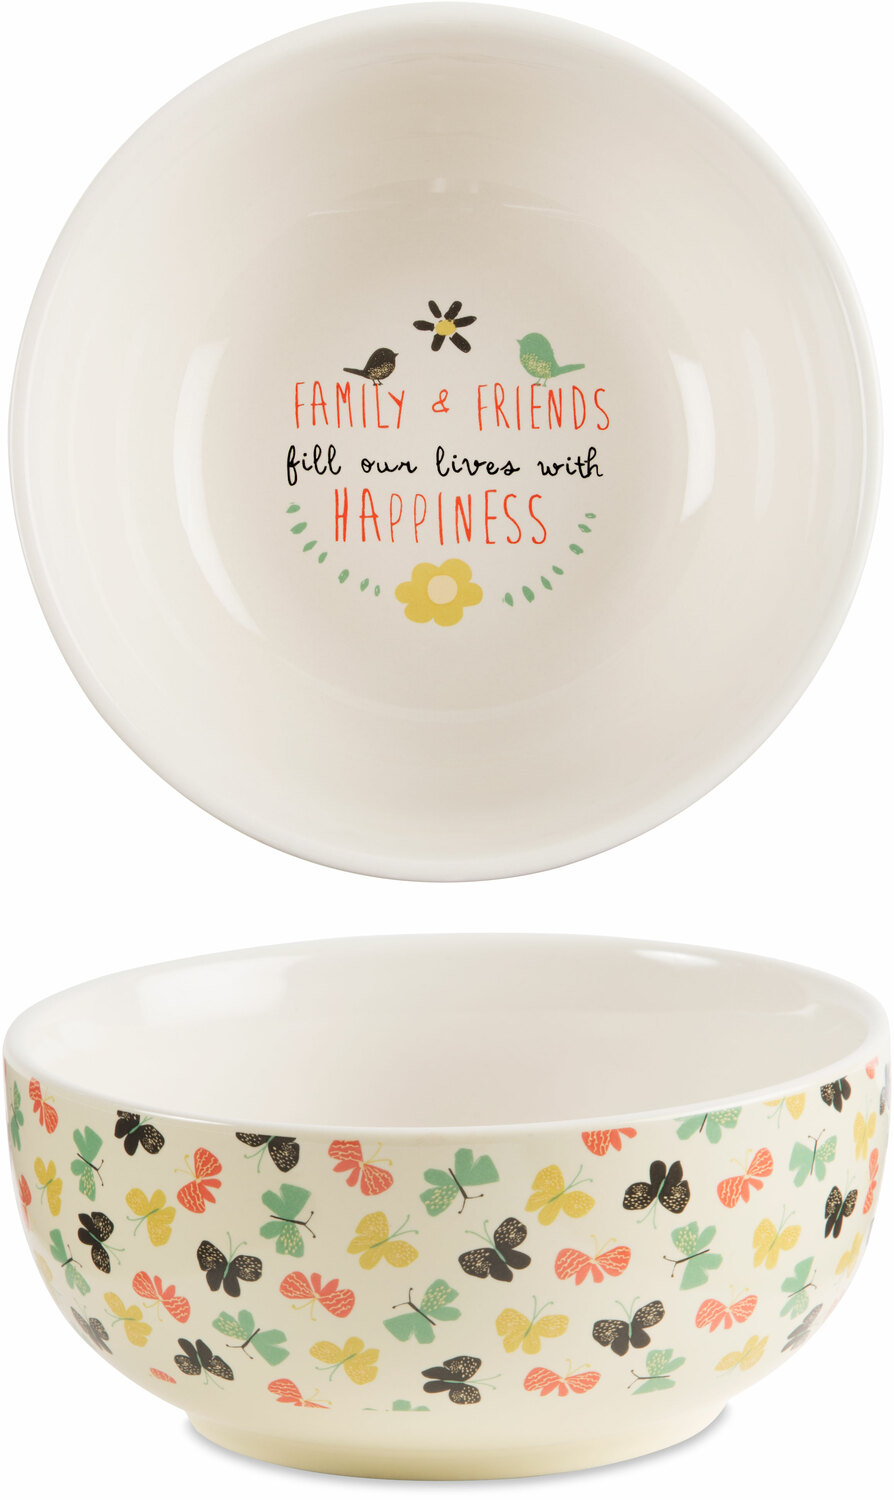 Family & Friends by Bloom by Amylee Weeks - Family & Friends - 2.75"x 6" Ceramic Bowl